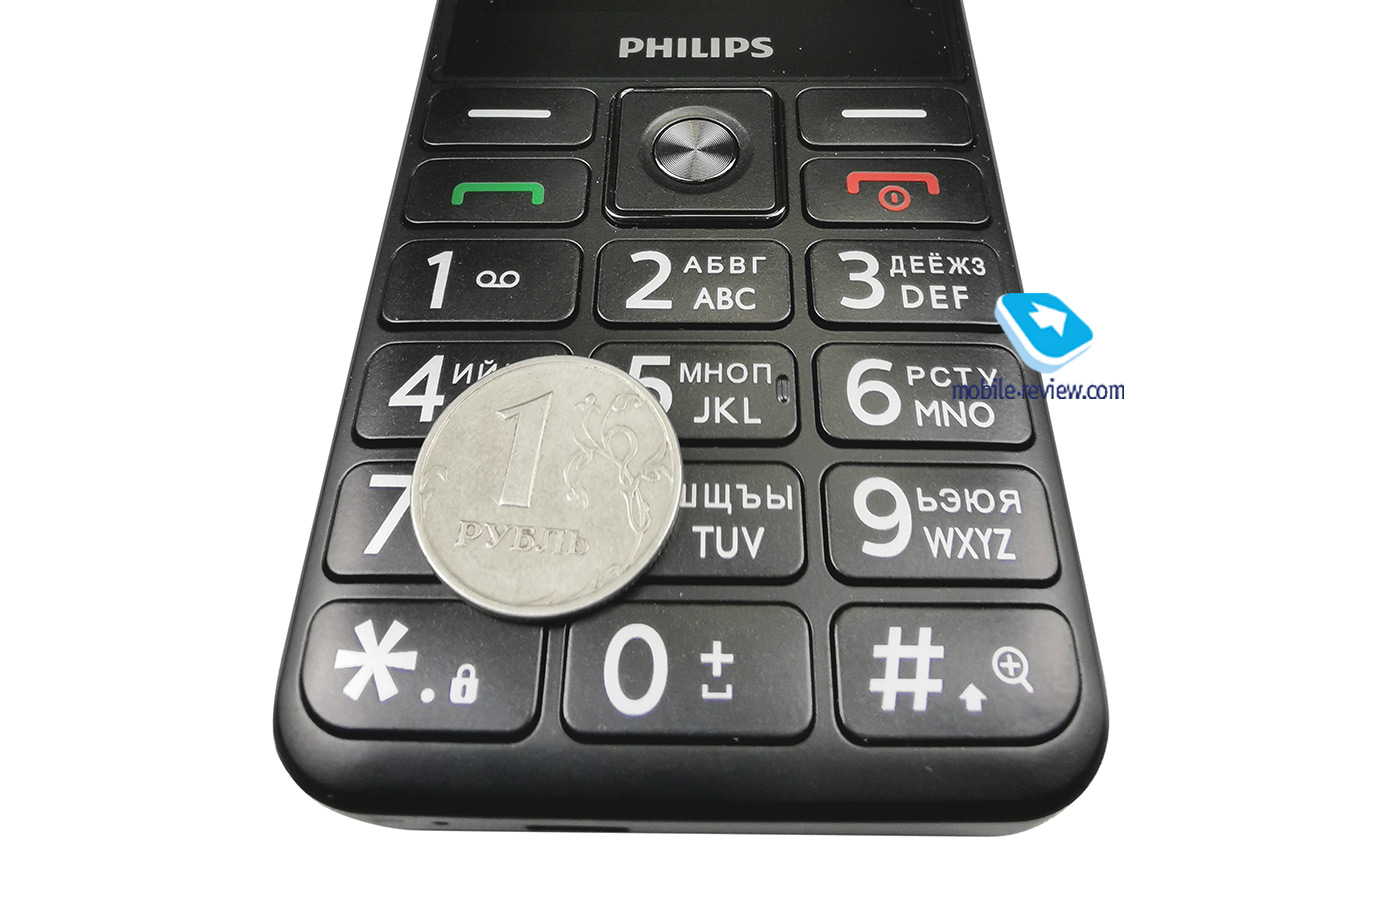 Review of push-button phones Philips Xenium E117 and Xenium E207